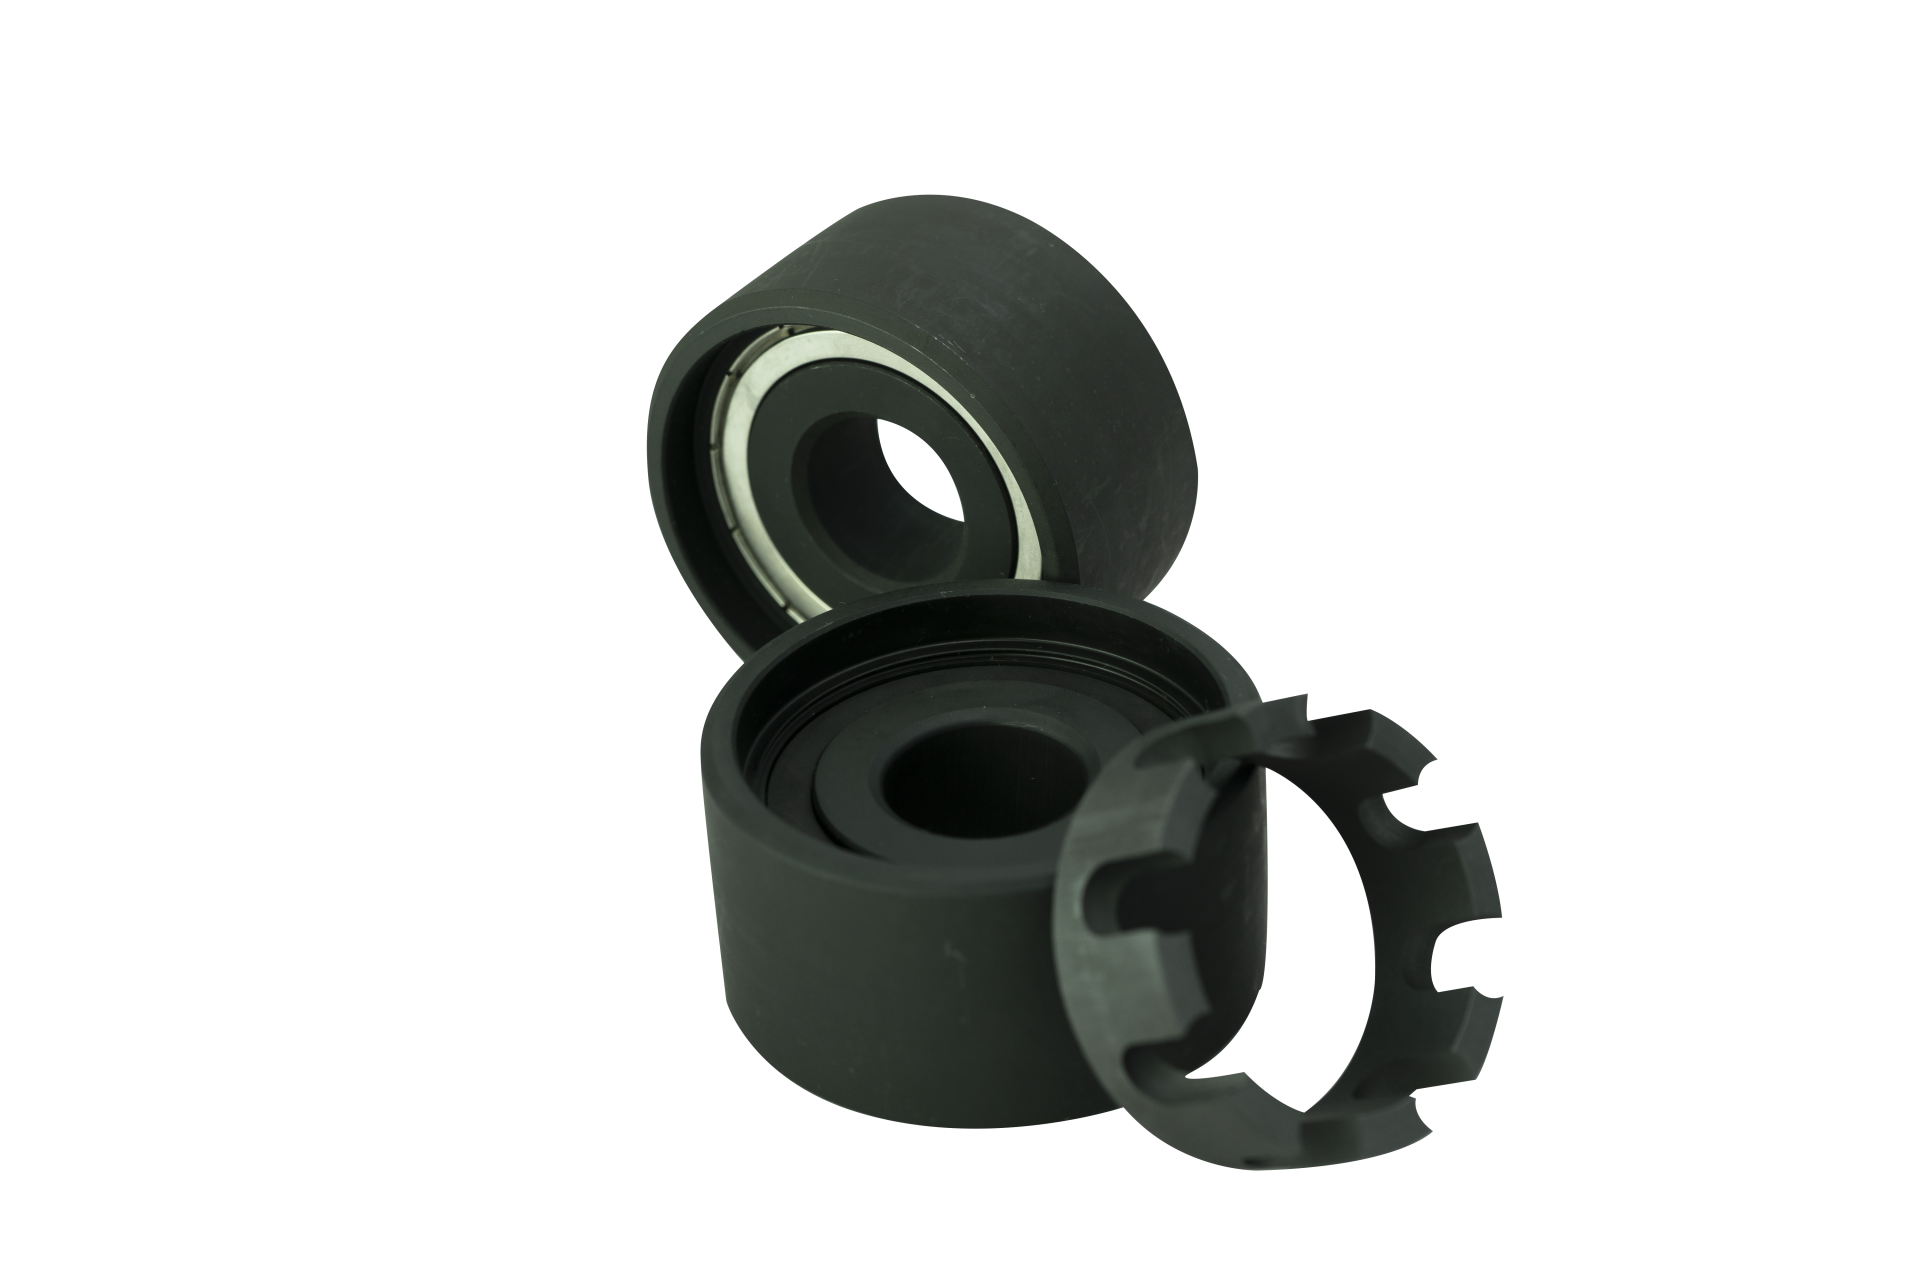 Waelz bearing roller with graphite cage